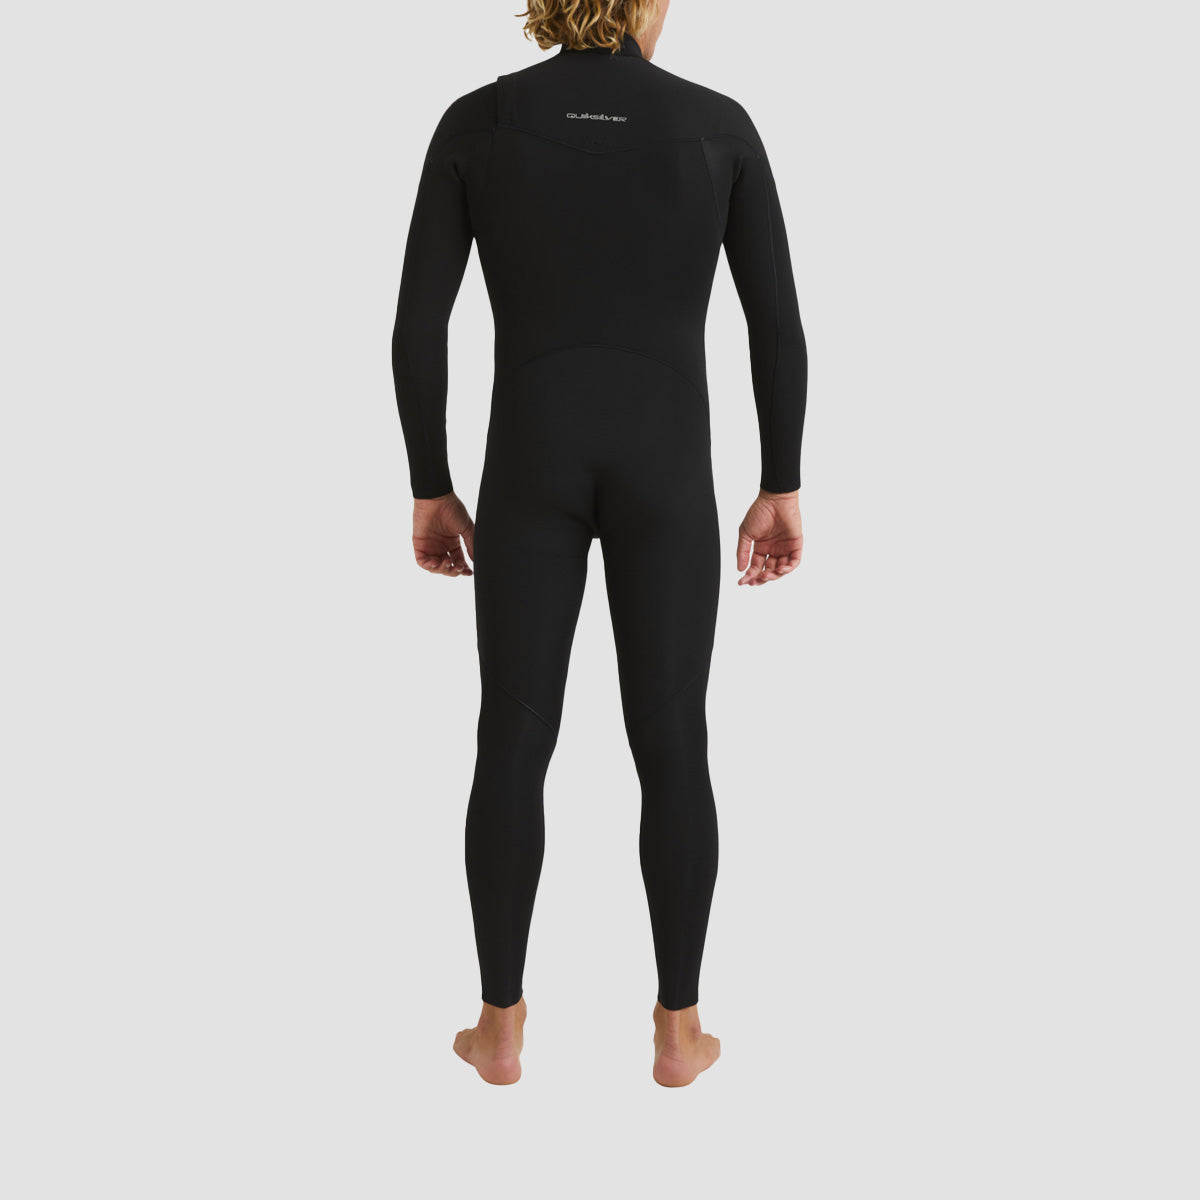 Quiksilver Everyday Sessions 3/2mm Chest Zip Wetsuit Black